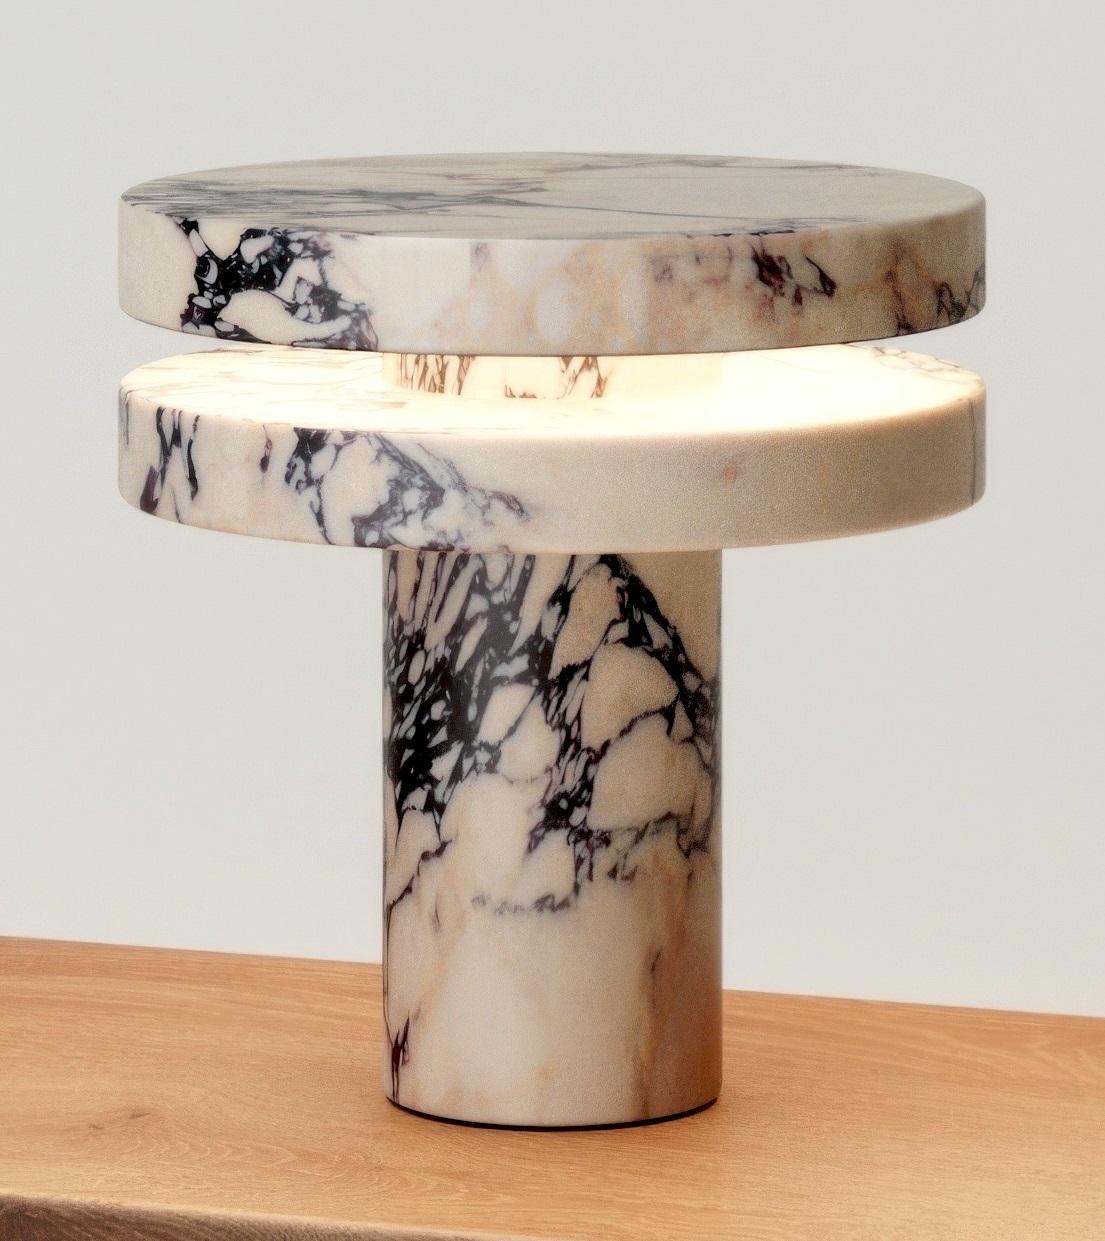 M_014 Table Lamp by Monolith Studio
Signed and Numbered.
Dimensions: Ø 30 x H 32 cm.
Materials: Calacatta Viola marble.

Available in travertine, onyx and lava rock on request All our lamps can be wired according to each country. If sold to the USA